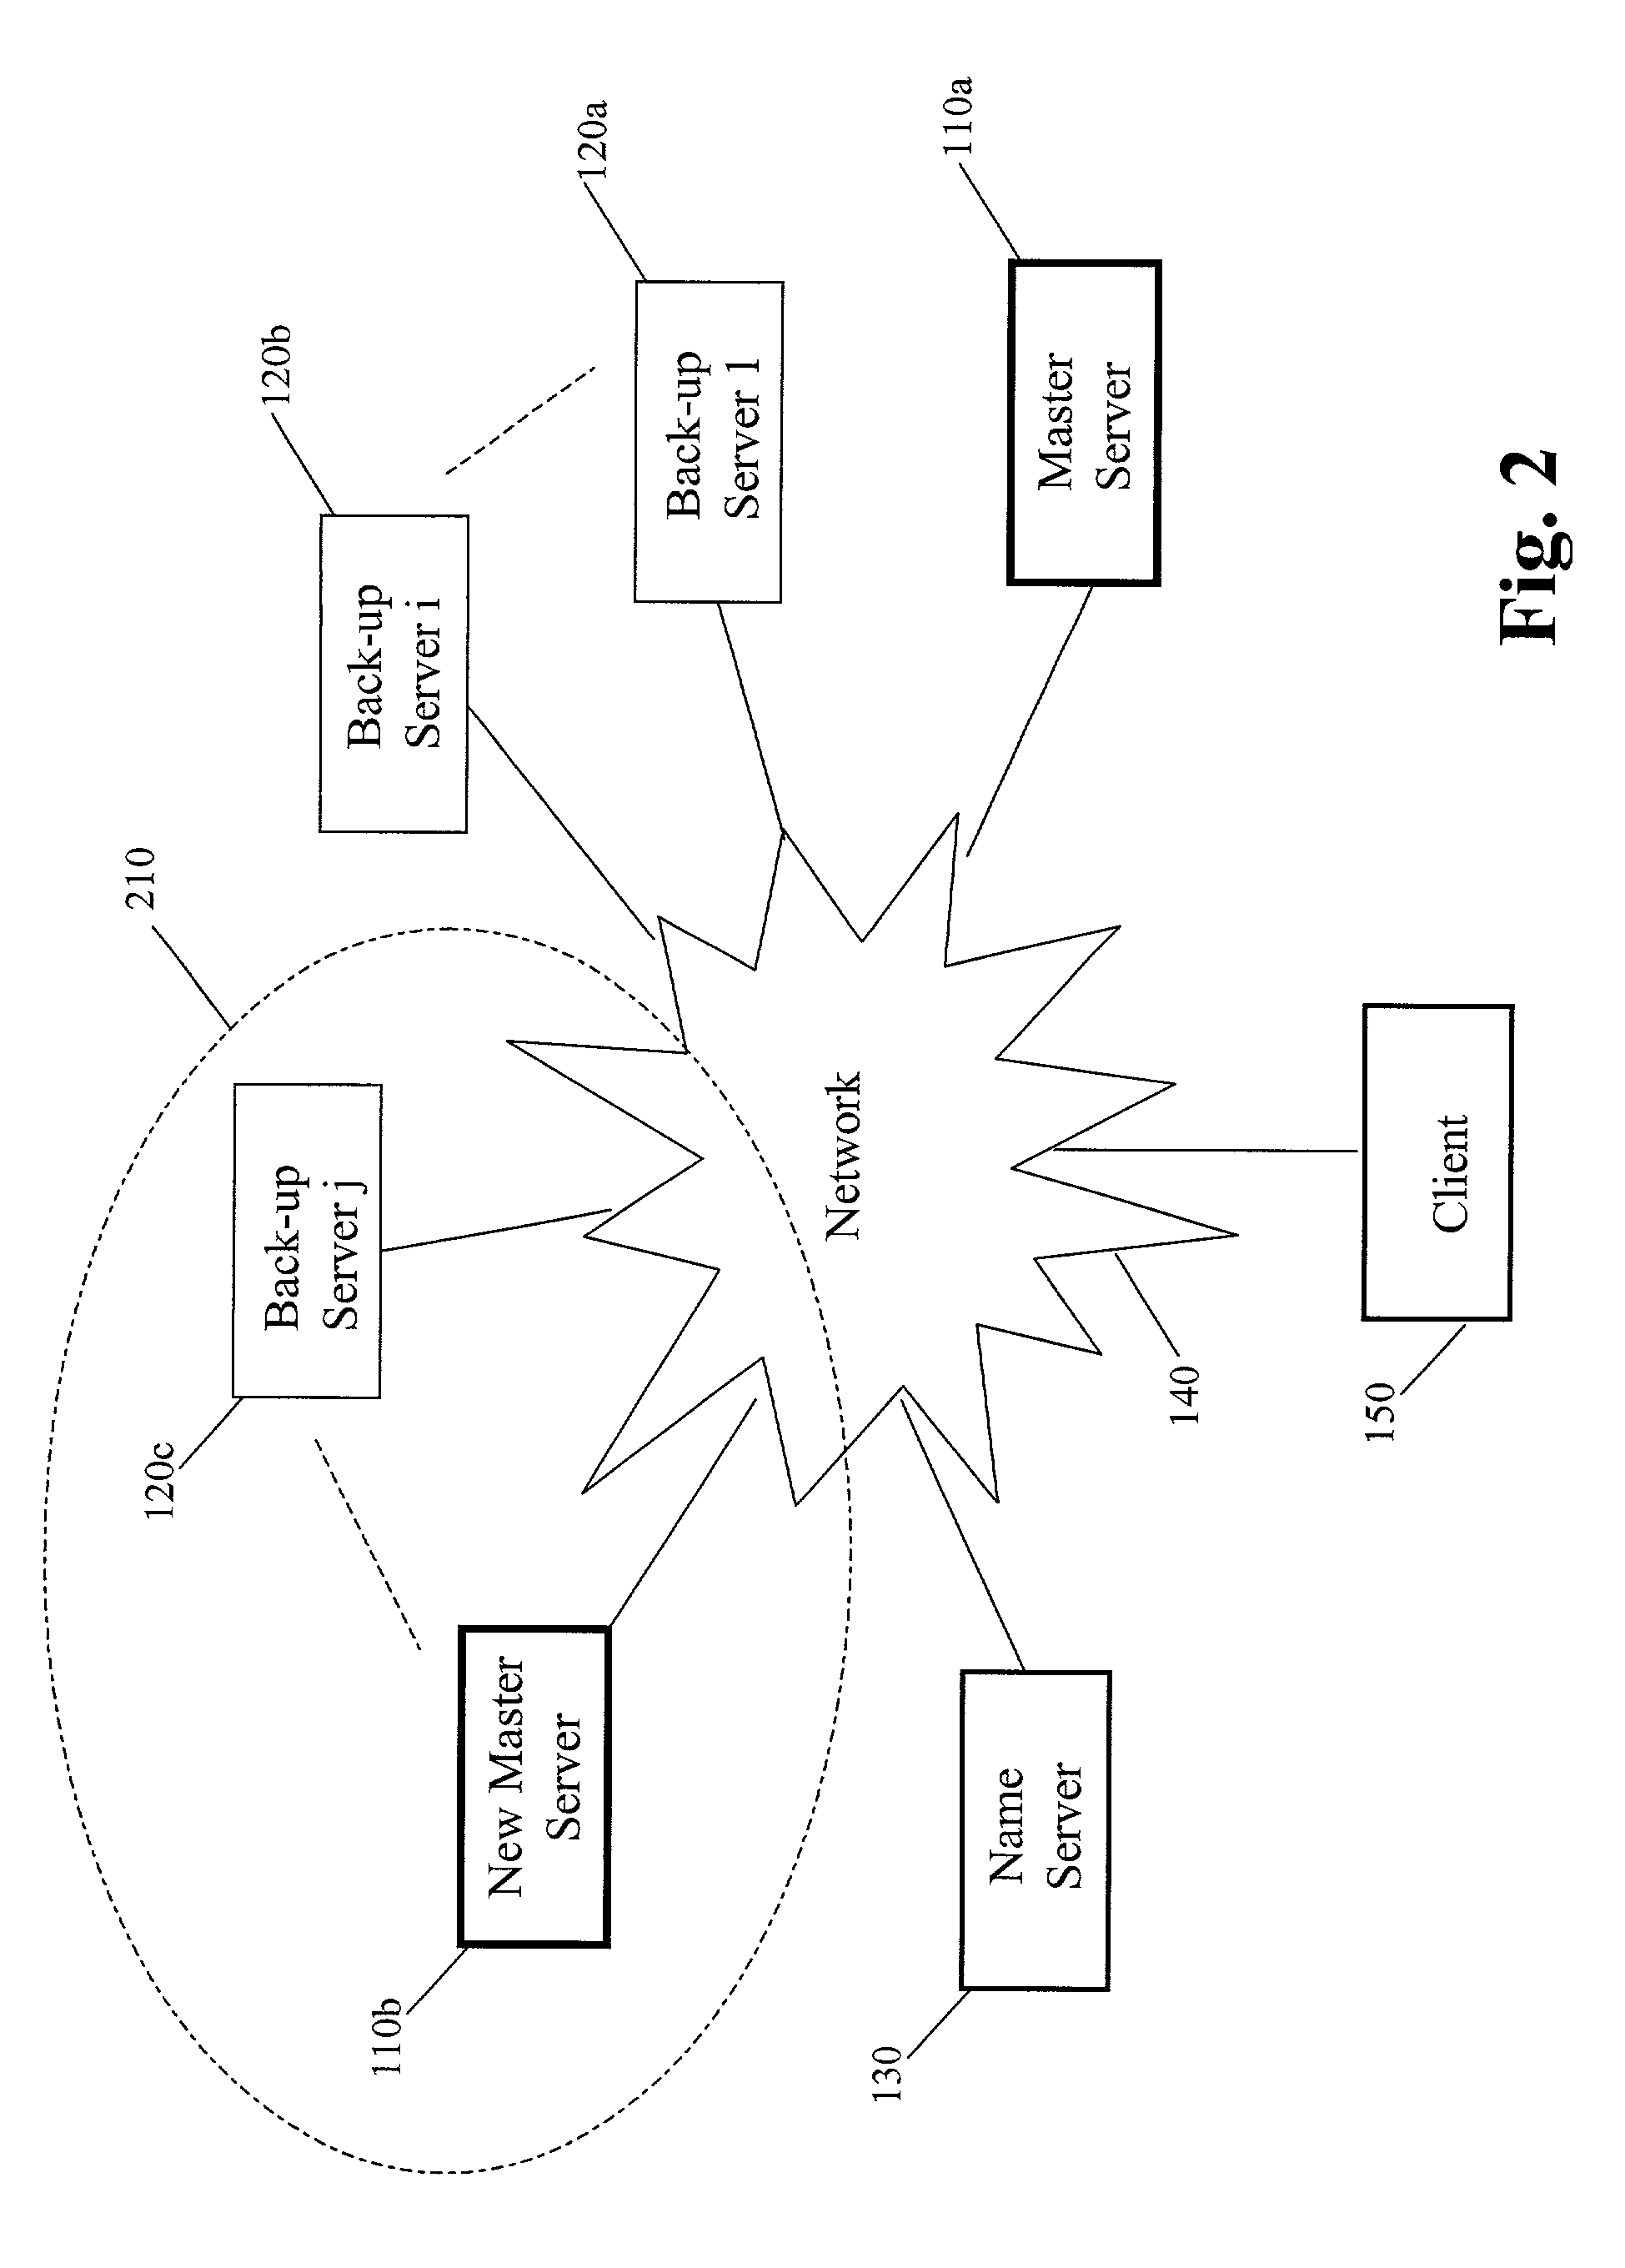 Self-monitoring mechanism in fault-tolerant distributed dynamic network systems